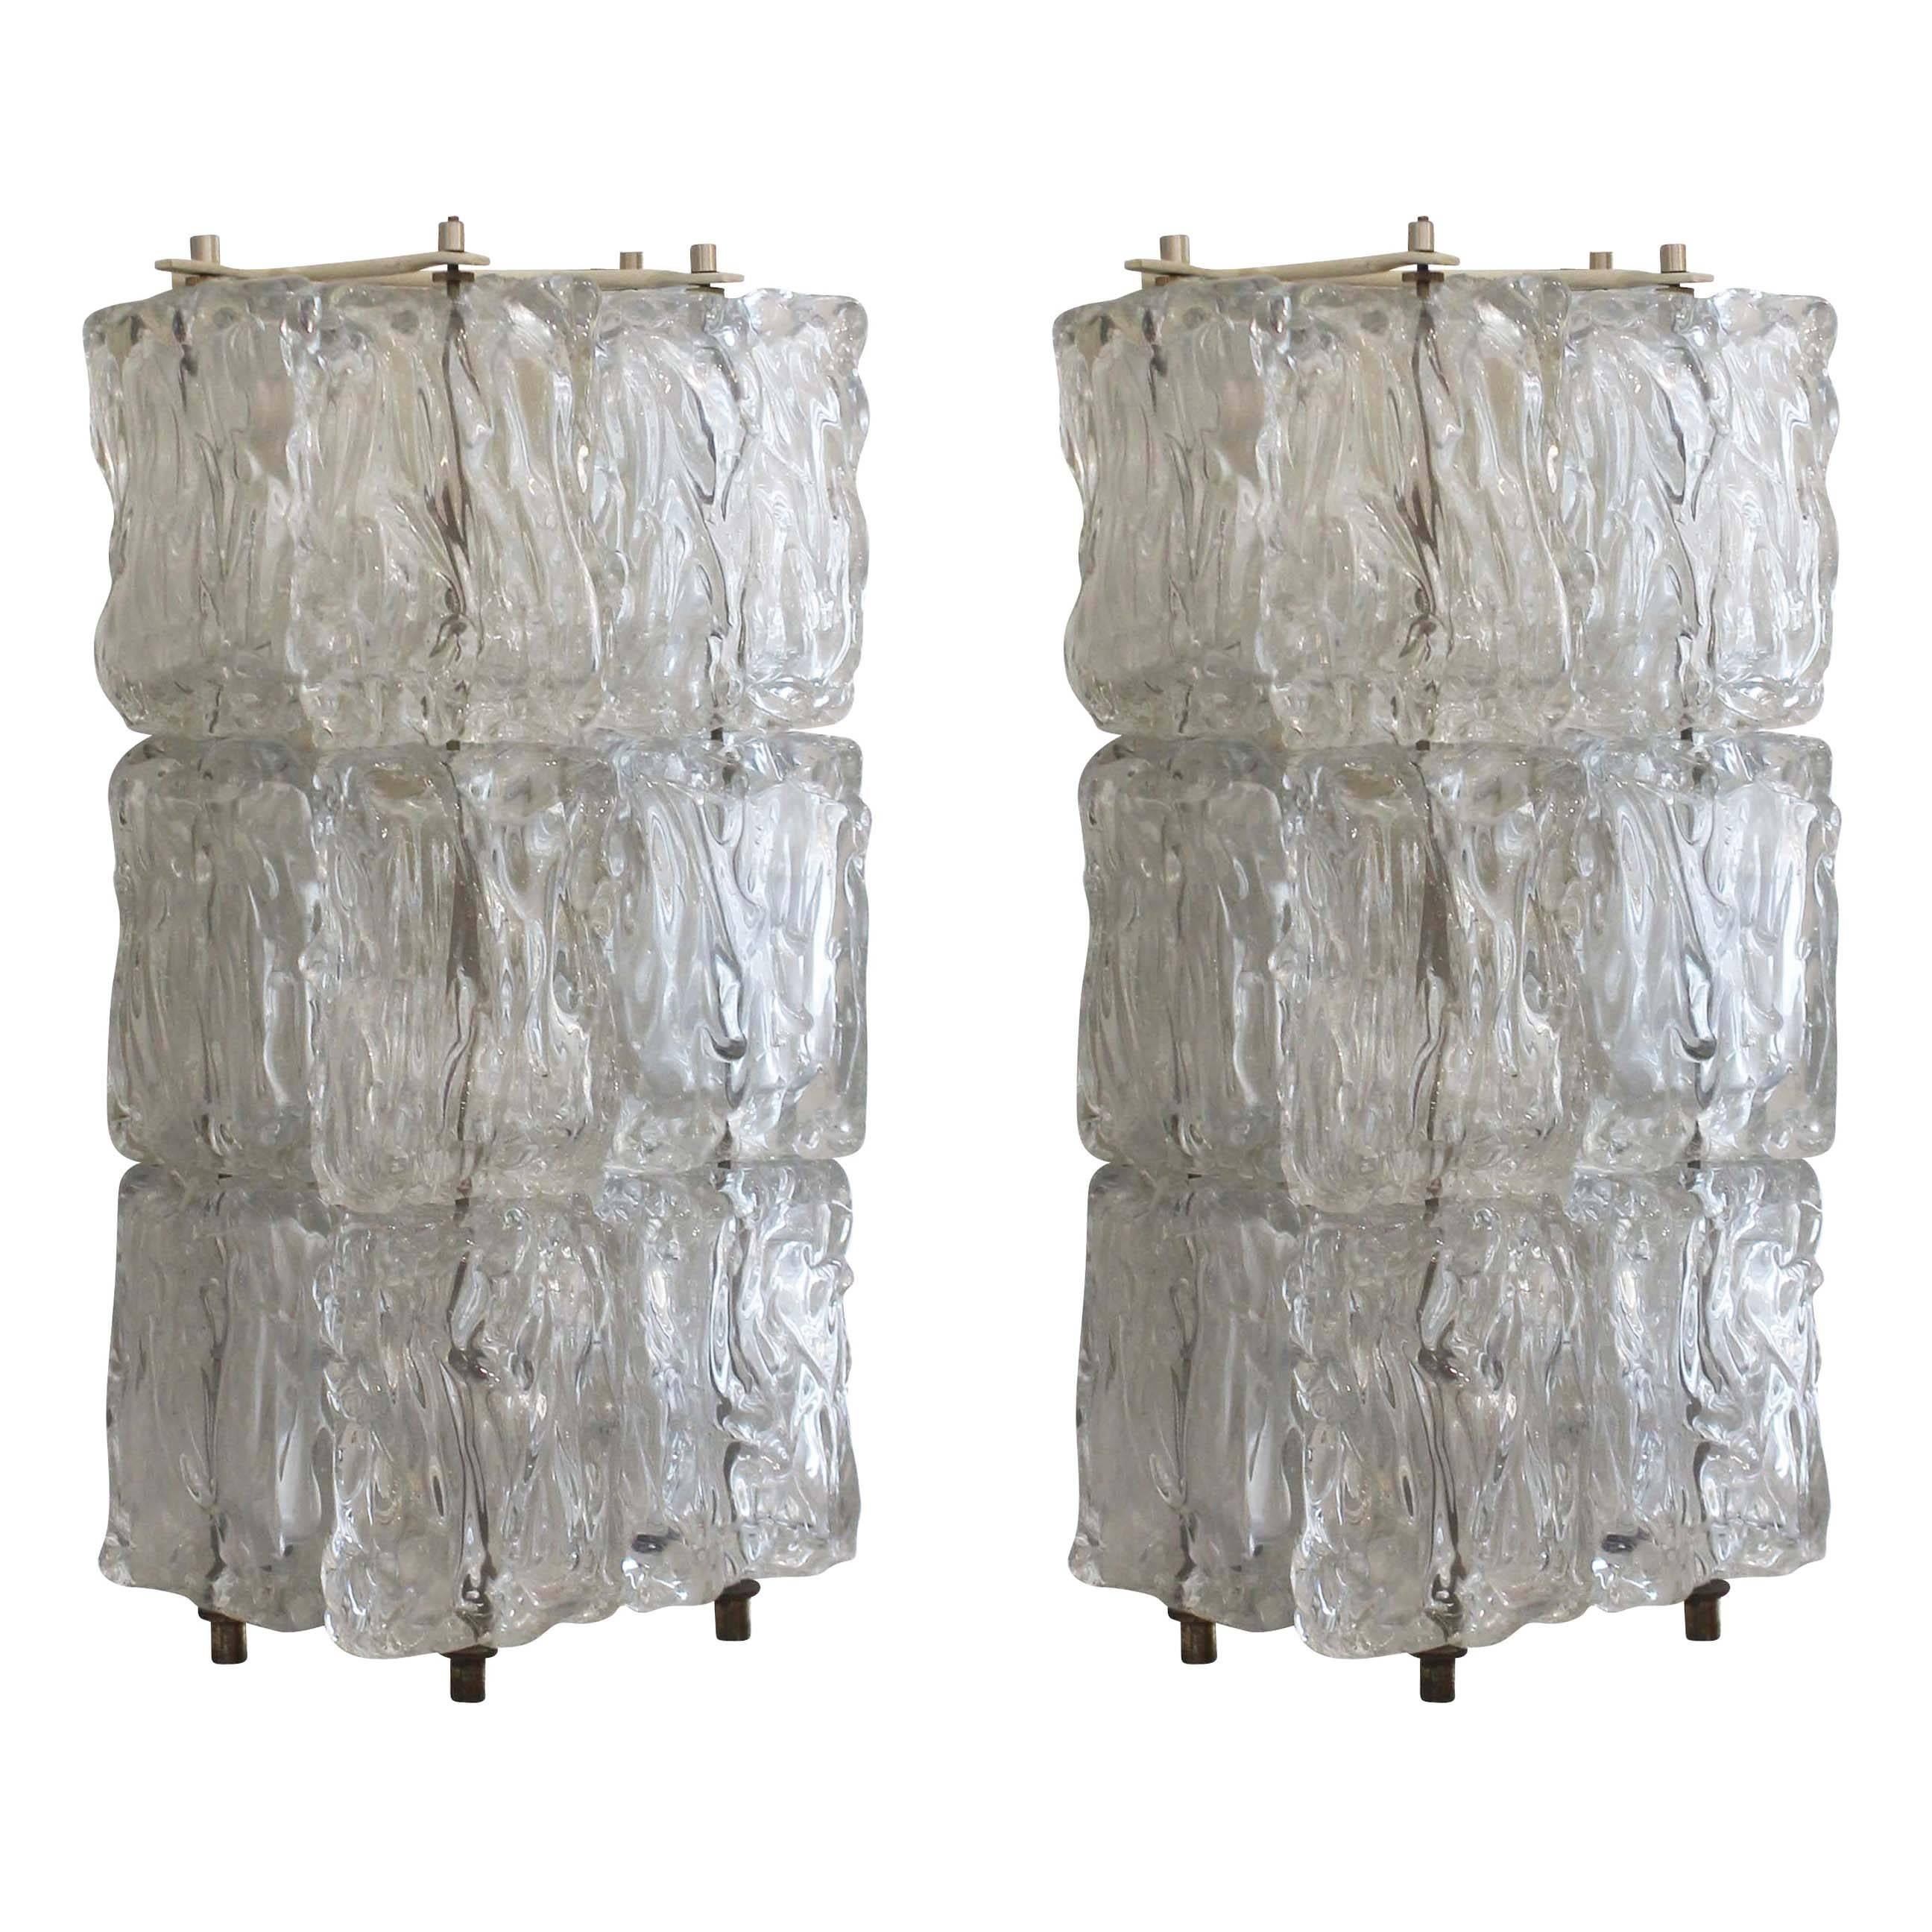 Pair of Murano glass sconces each composed of the four columns of textured glasses. Each column has three glasses. The frame is off-white metal and holds two candelabra sockets.

Available for viewing at Gaspare Asaro-Italian Modern in NYC